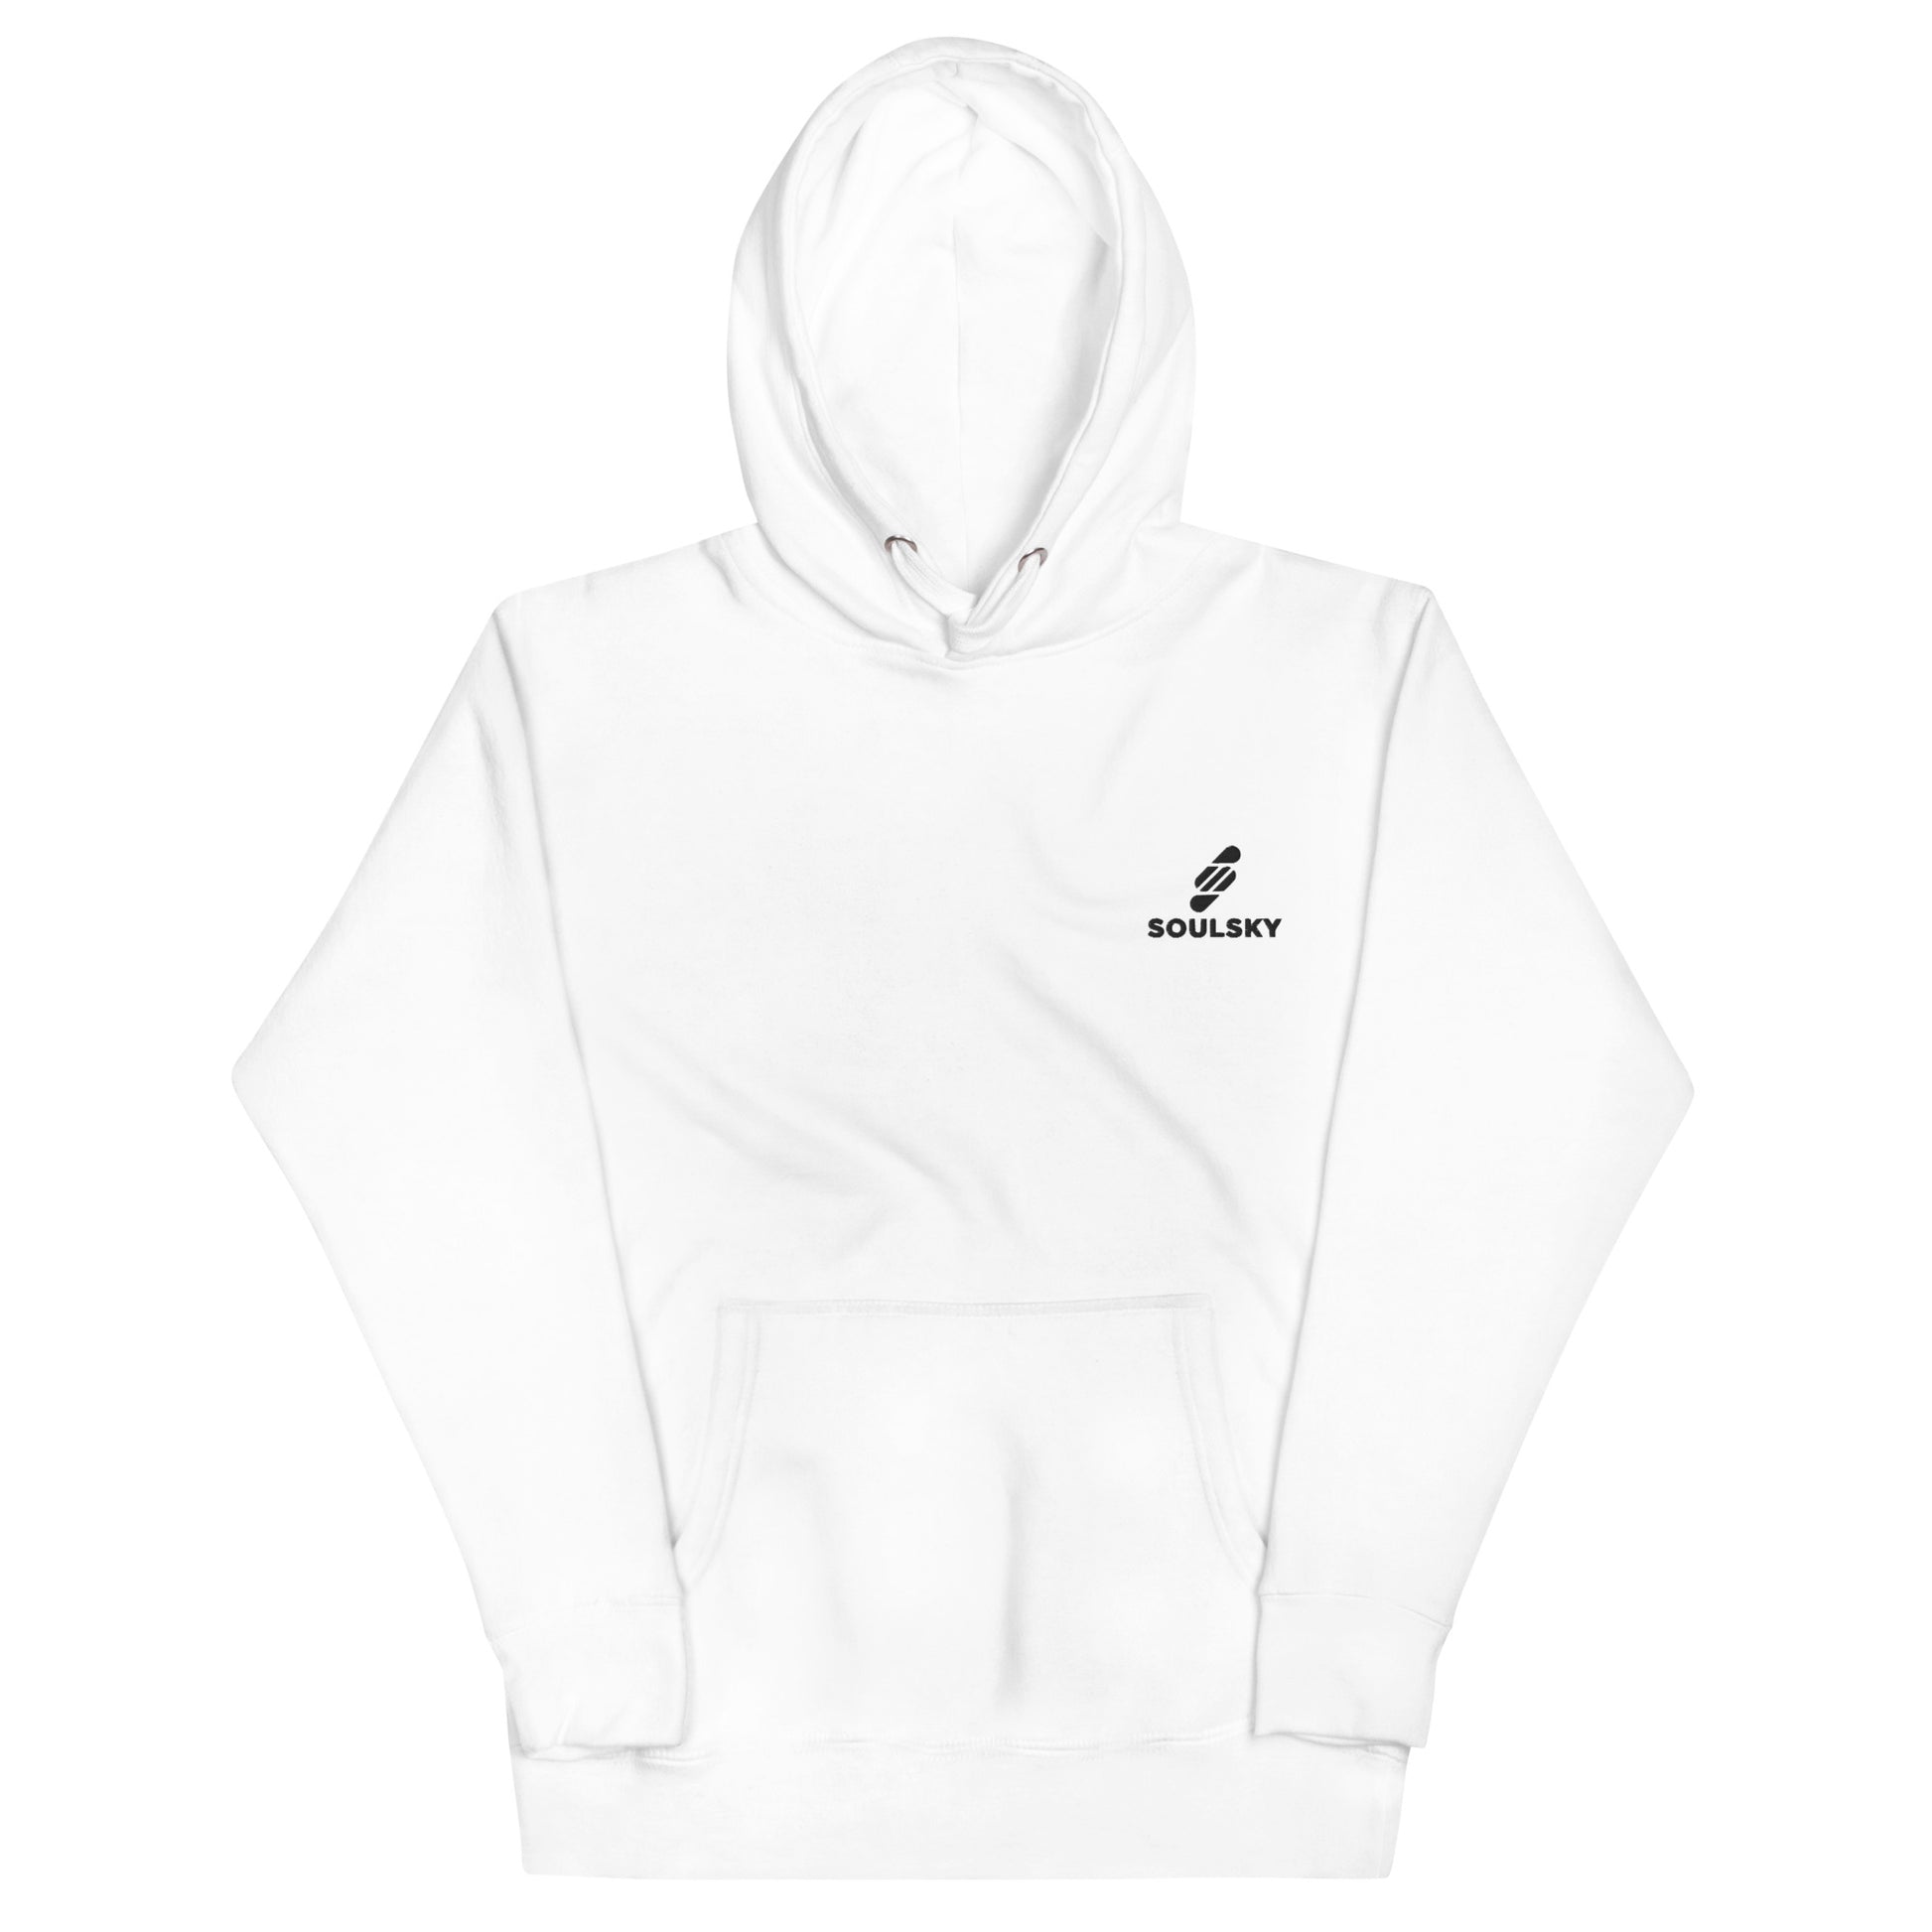 White hoodie with white embroidered logo on the upper left side that says 'SOULSKY'. Pic 2.